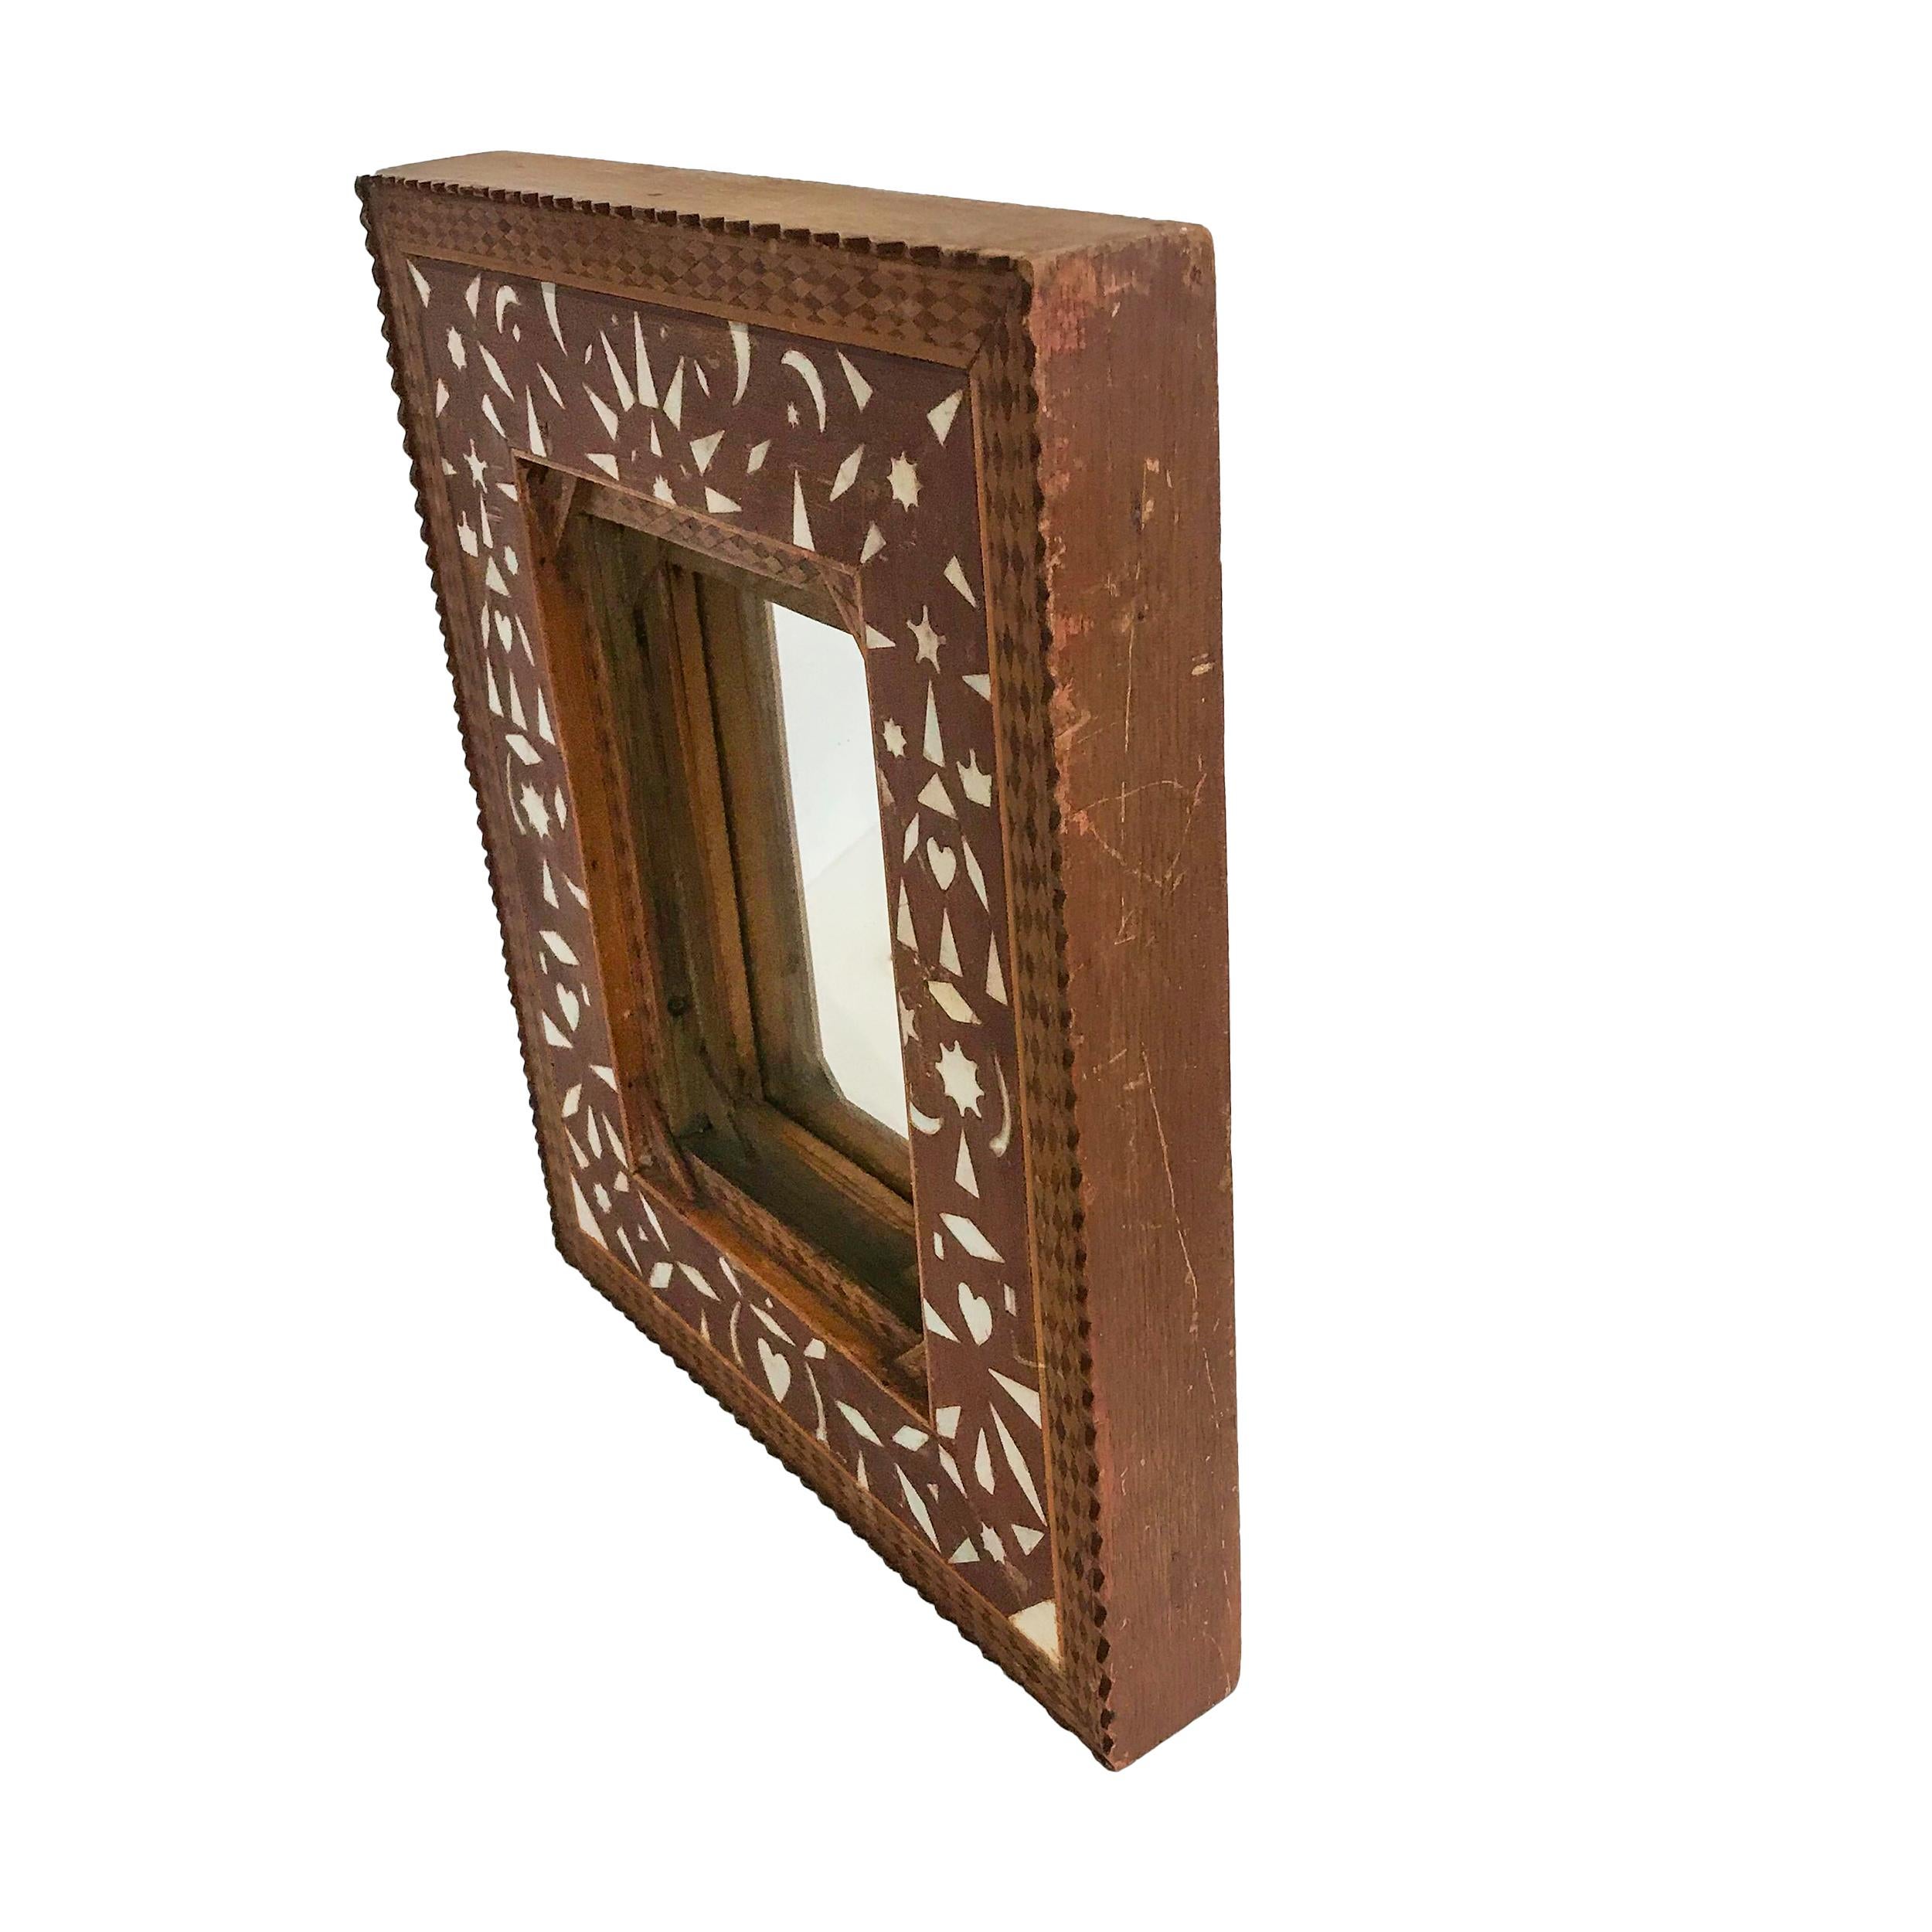 With a Tramp Art carved edge and mixed wood parquetry border, also with mother of pearl inlay, all in alligatored finish, circa 1880-1900.

Measures: 12 ½” x 10 ½” x 1 ¾”.